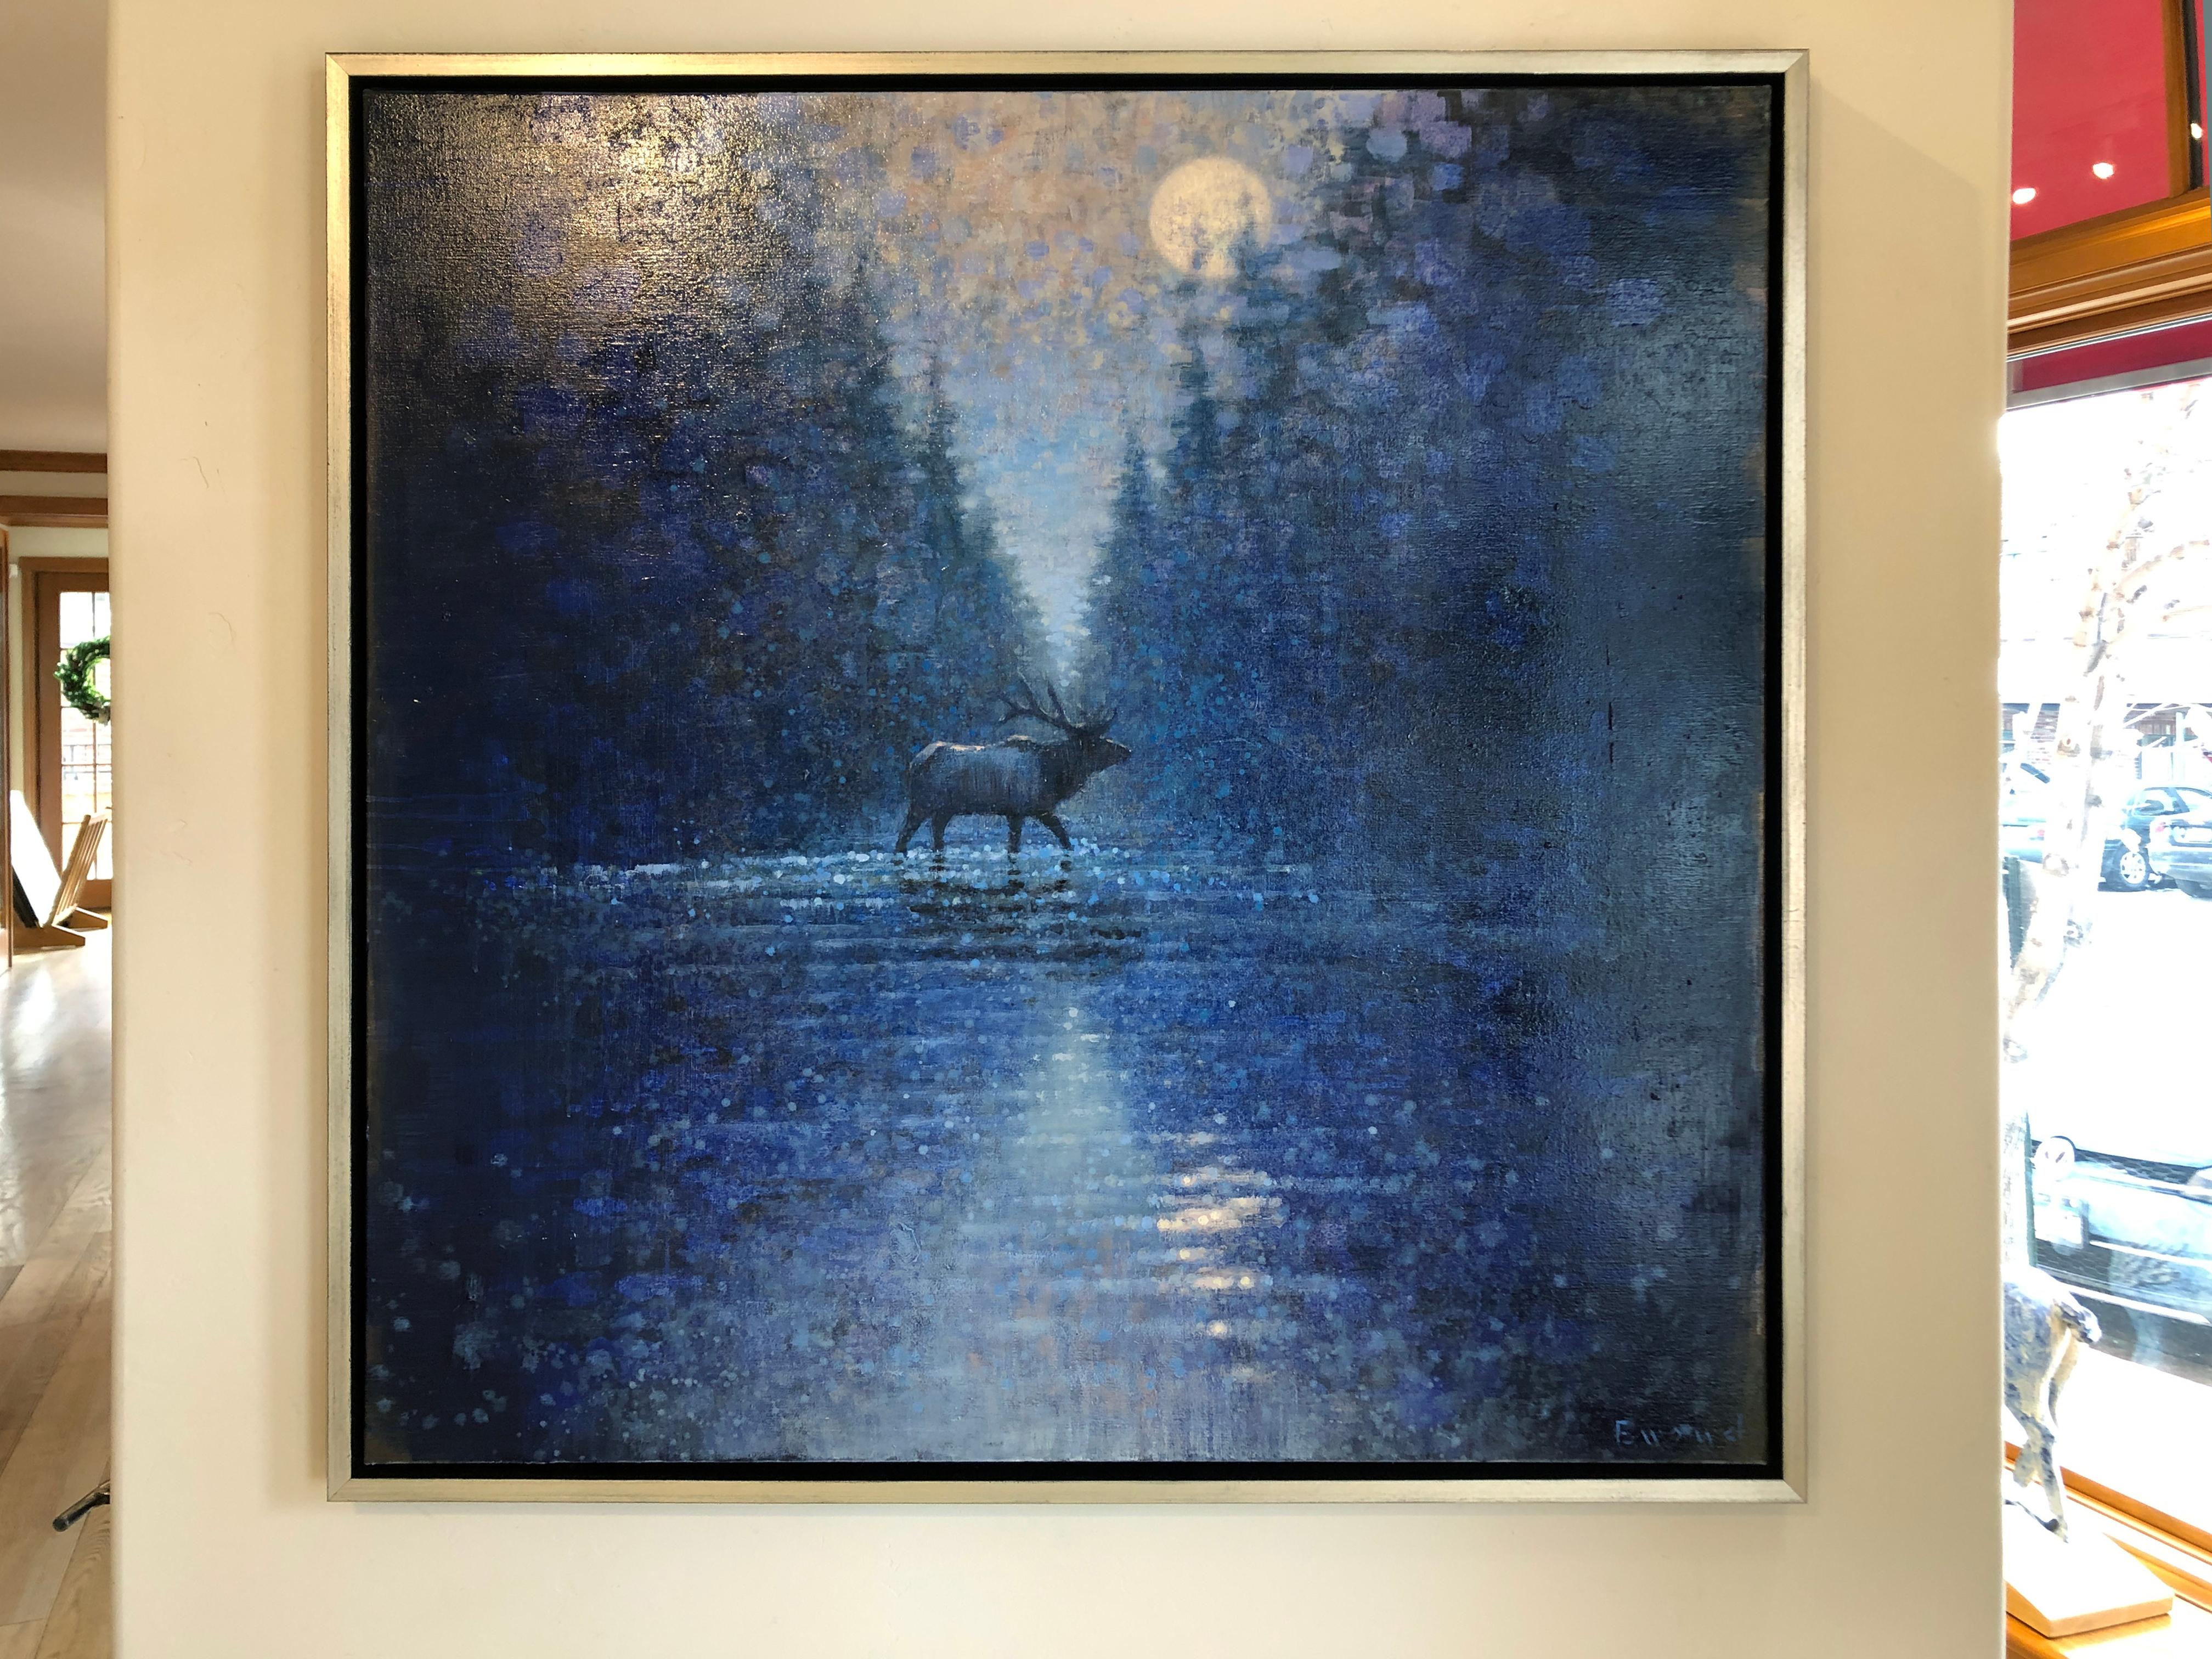 Frame size:  46 t x 46 w x 1.5 d

An elk wades in the middle of a watery landscape in the shimmering moonlight.   A serene scene from Dutch painter, Ewoud de Groot.

While realism is a factor of de Groot's style, over rendering is not a curse of